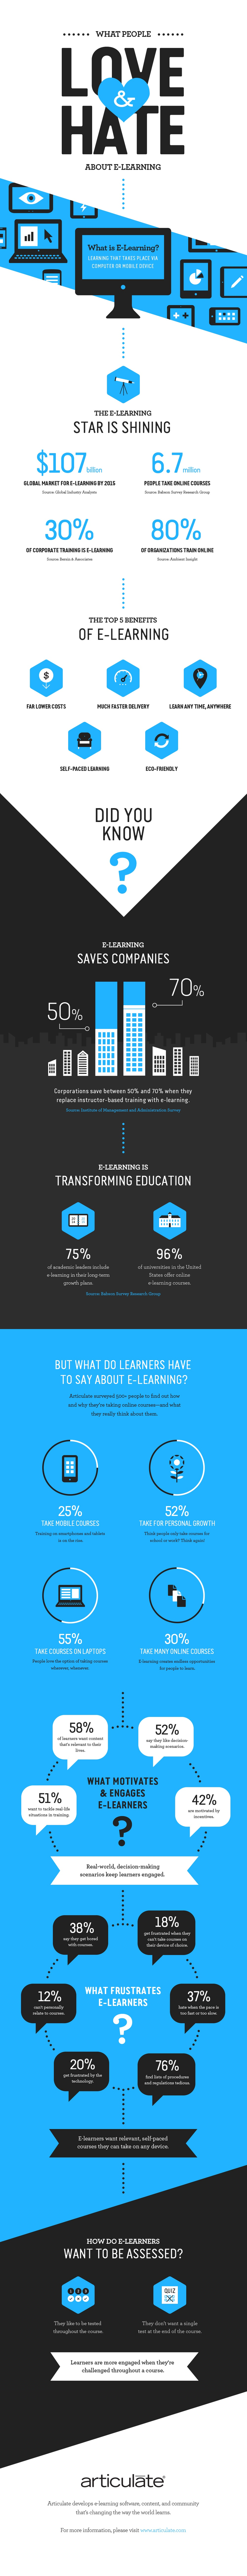 What People Love and Hate about eLearning Infographic